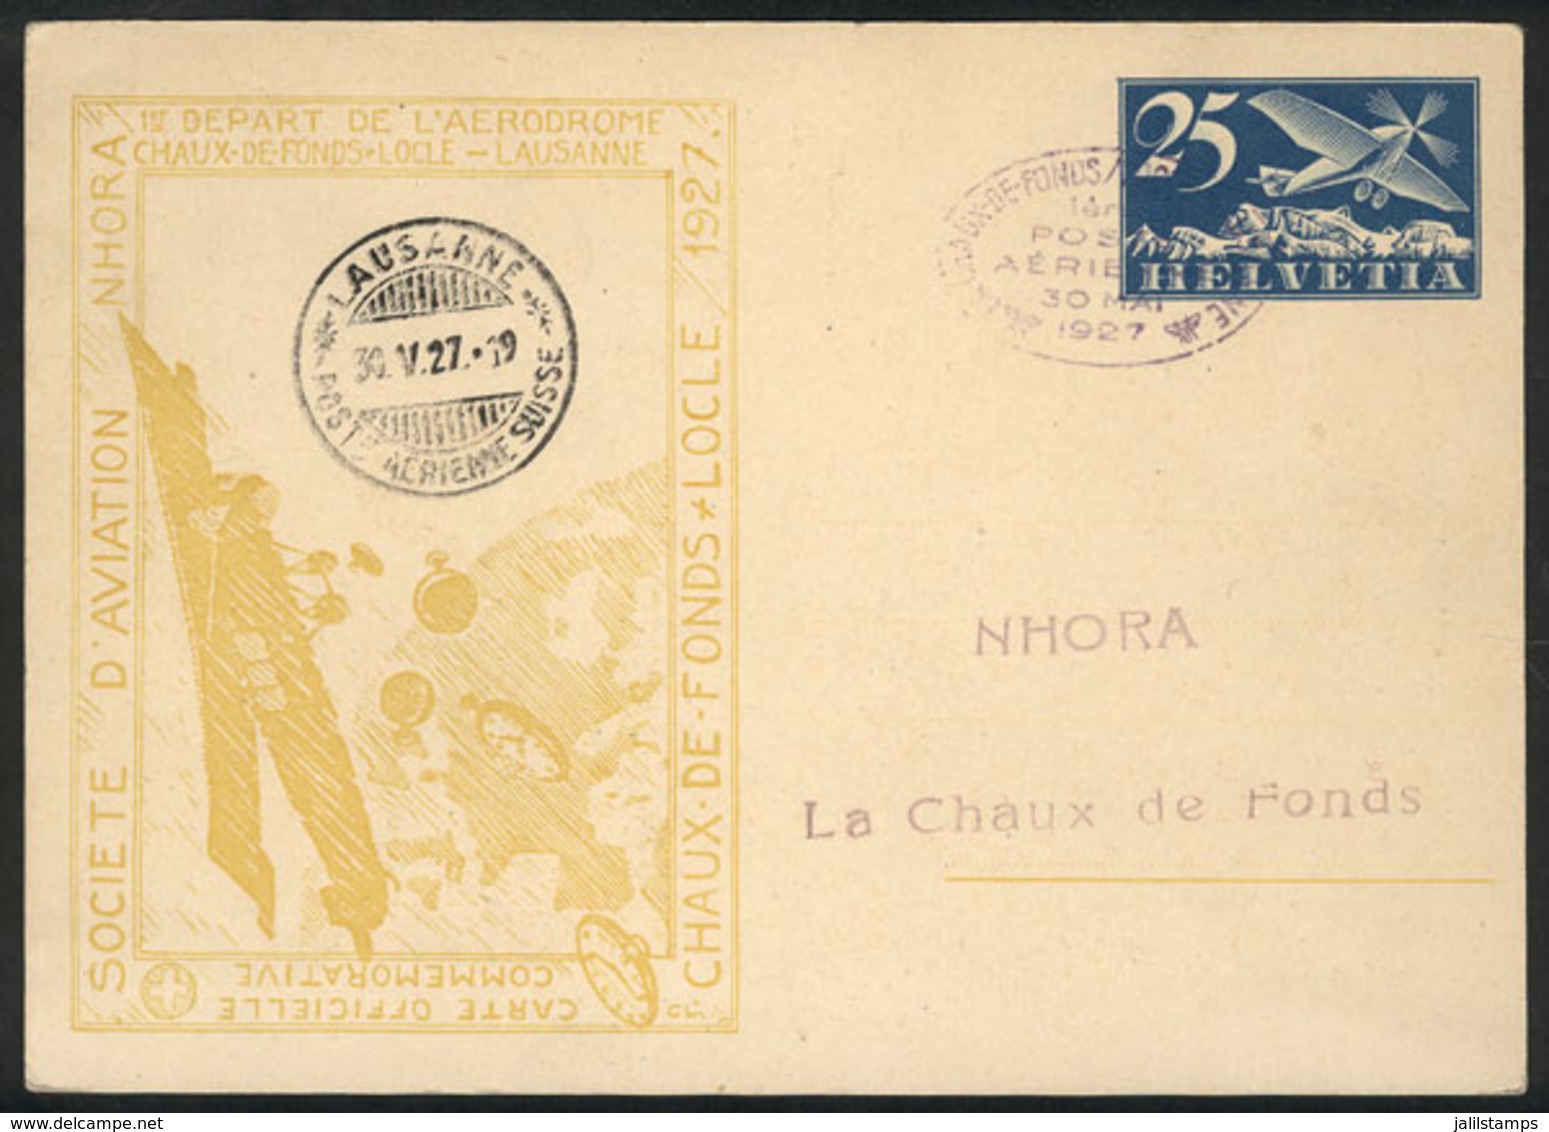 SWITZERLAND: 30/MAY/1927 Chaux-de-Fonds To Lausanne, First Flight, Special Postal Card (postal Stationery), Excellent Qu - ...-1845 Precursores